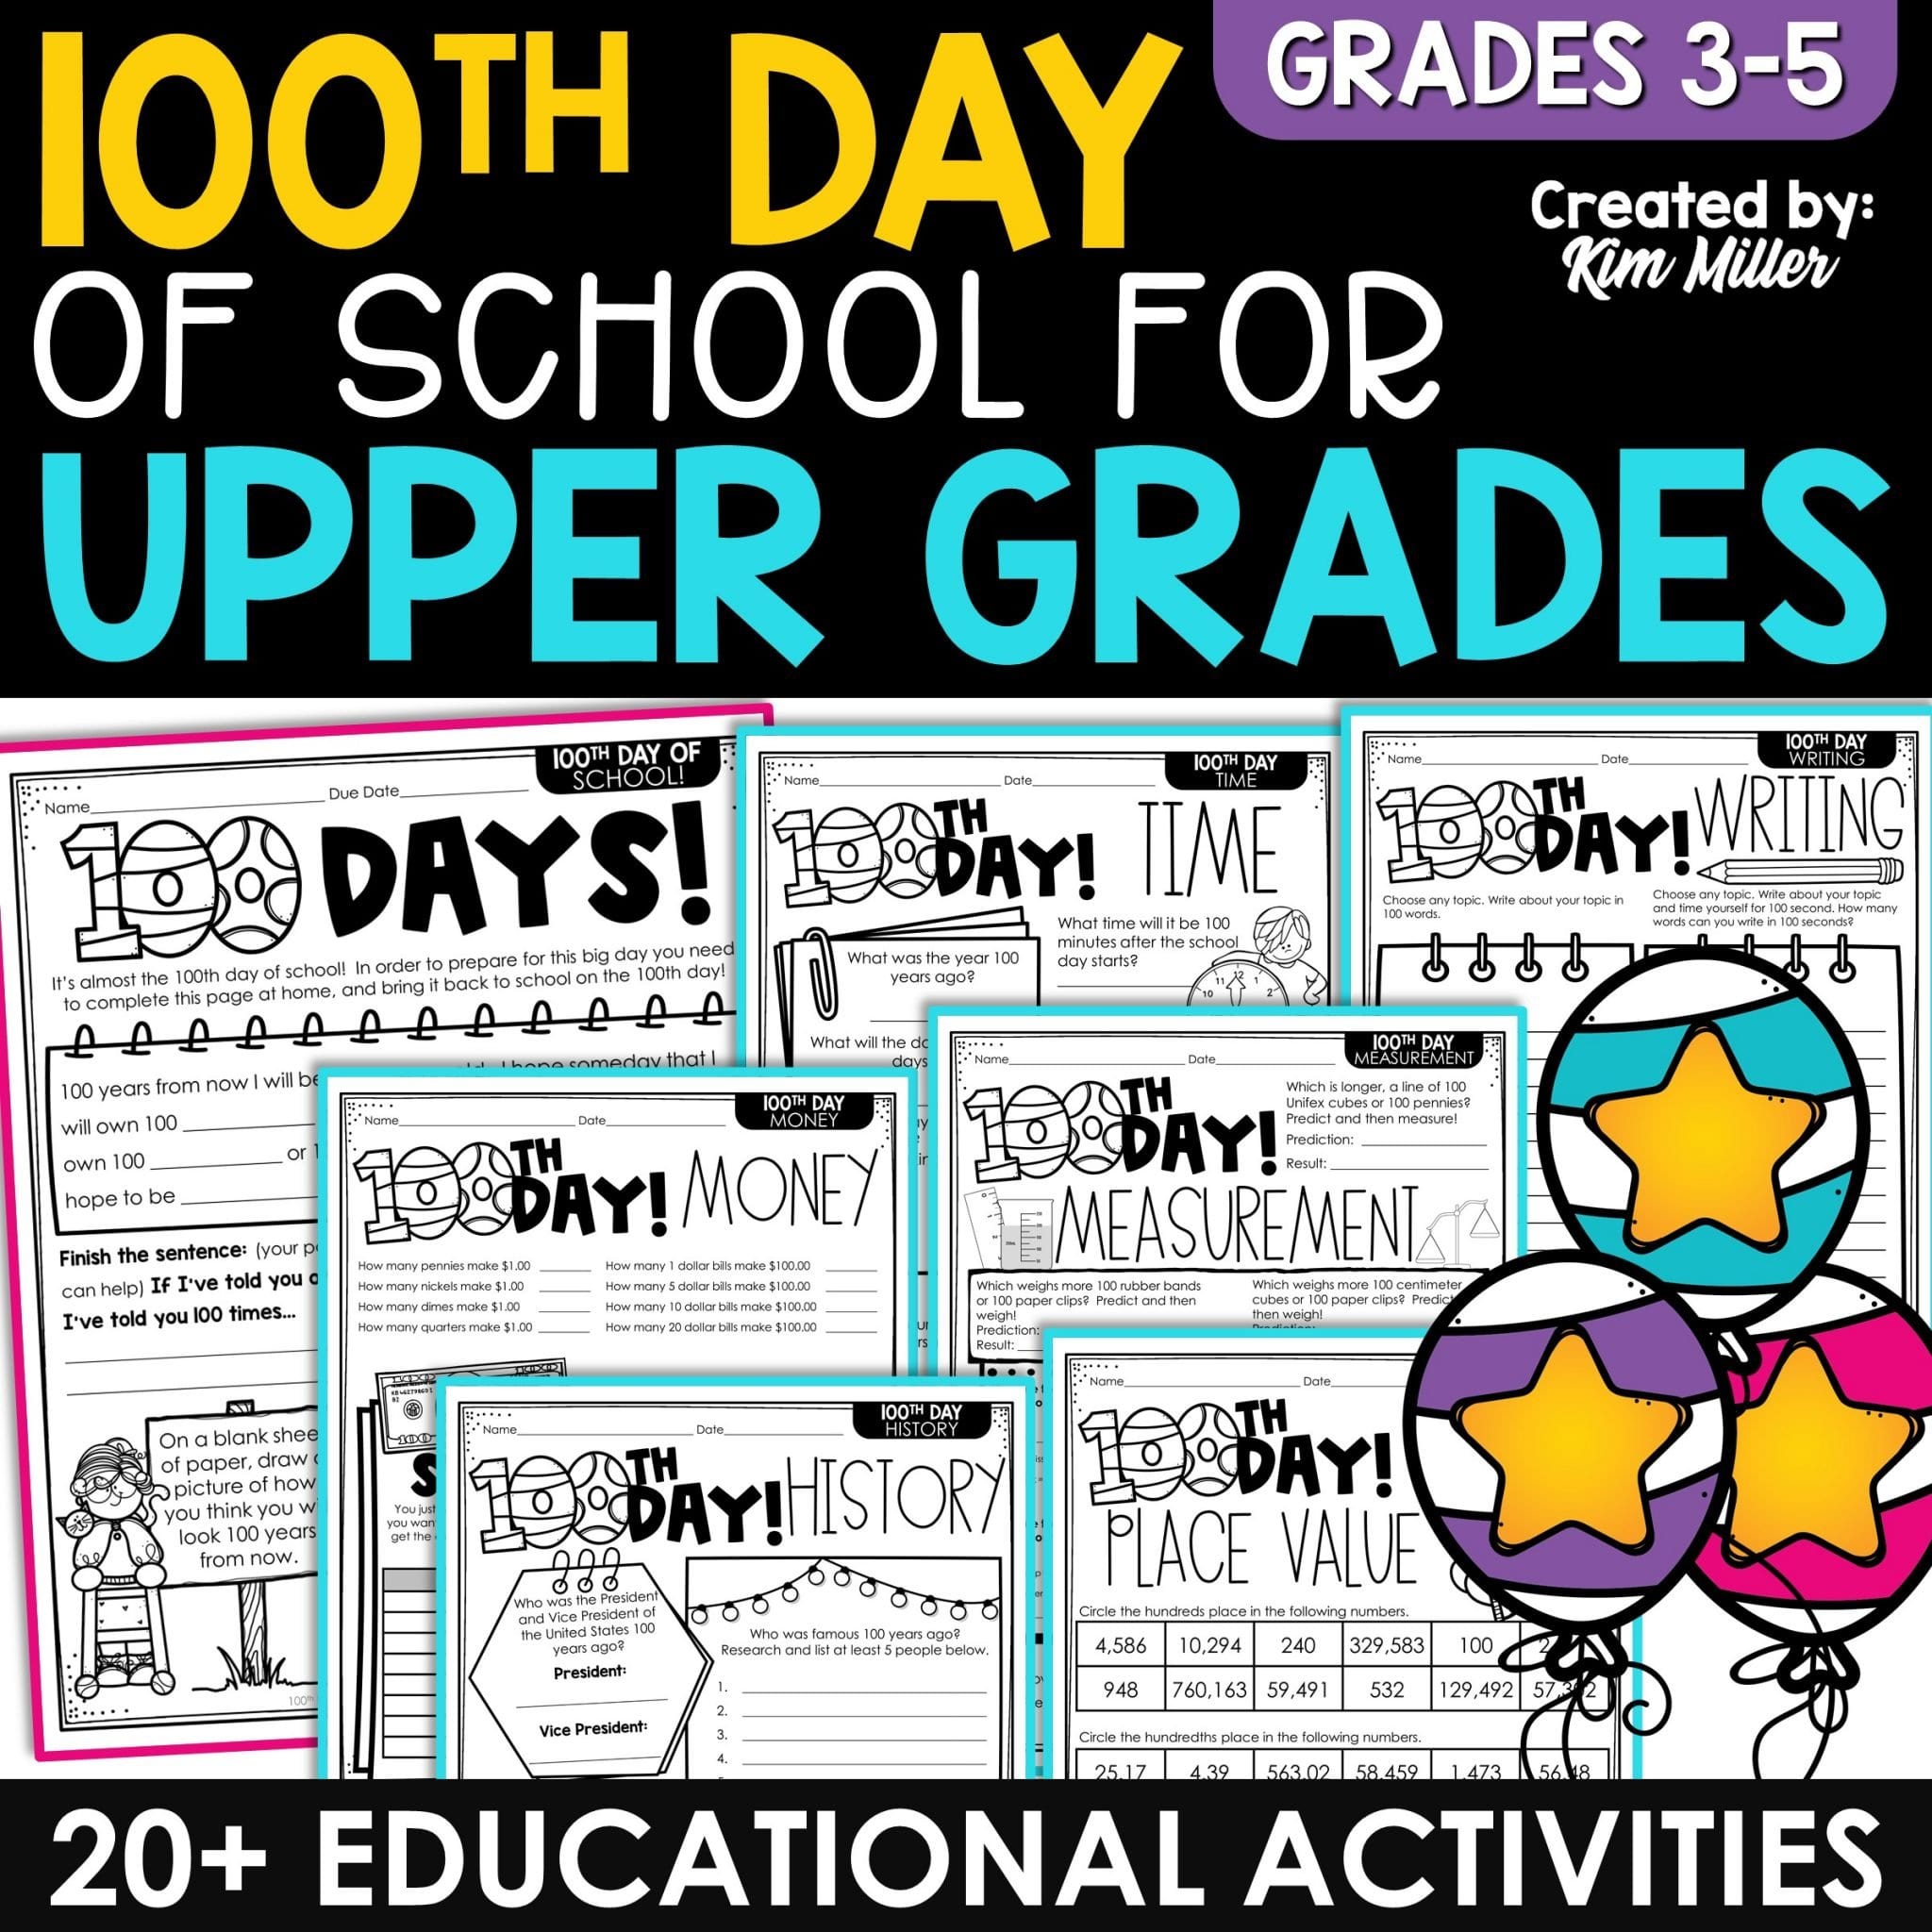 100th Day of School for Upper Grades